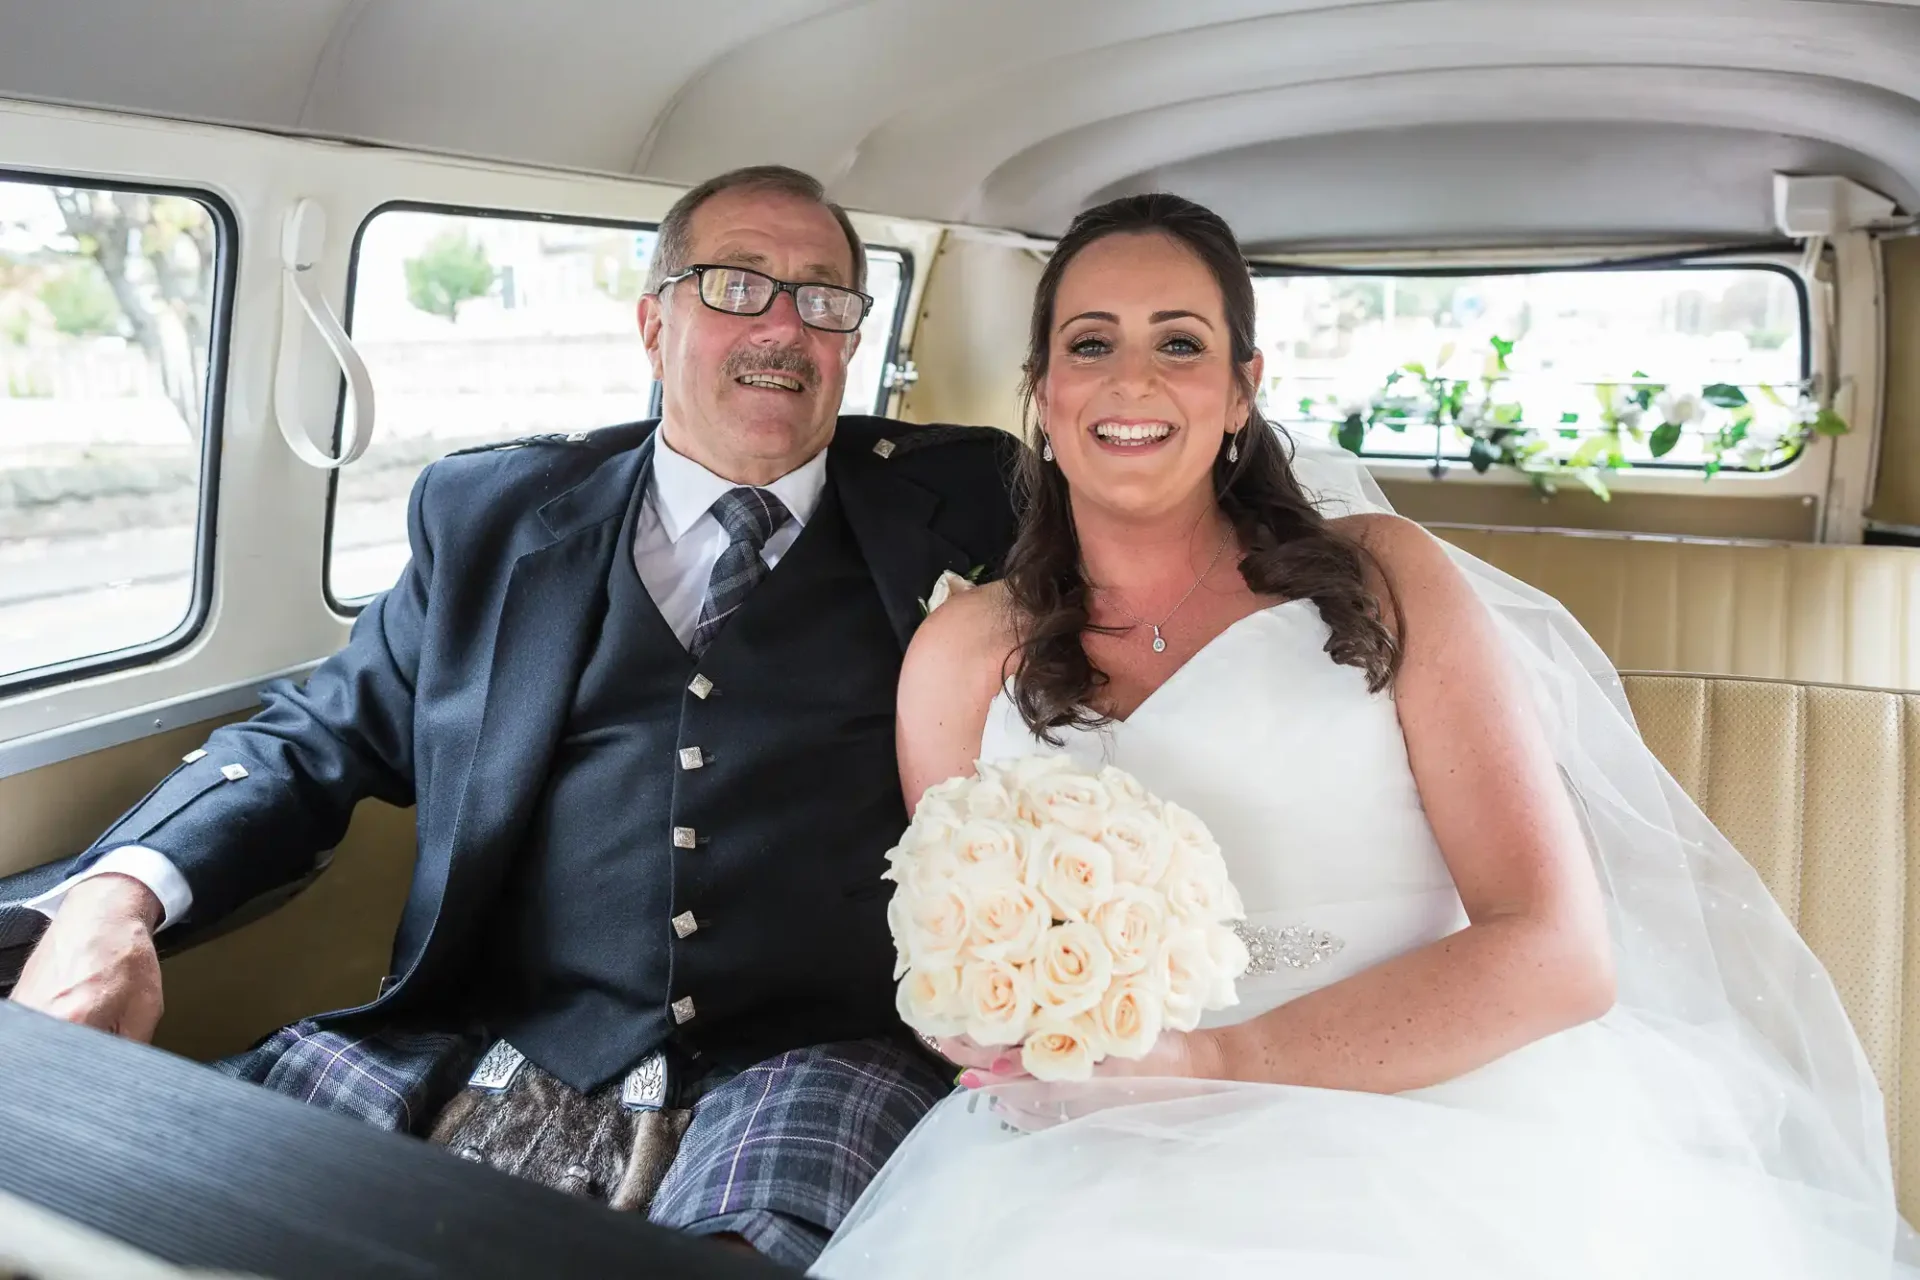 A bride in a white dress holding a bouquet sits beside an older man in a kilt inside a vintage car.